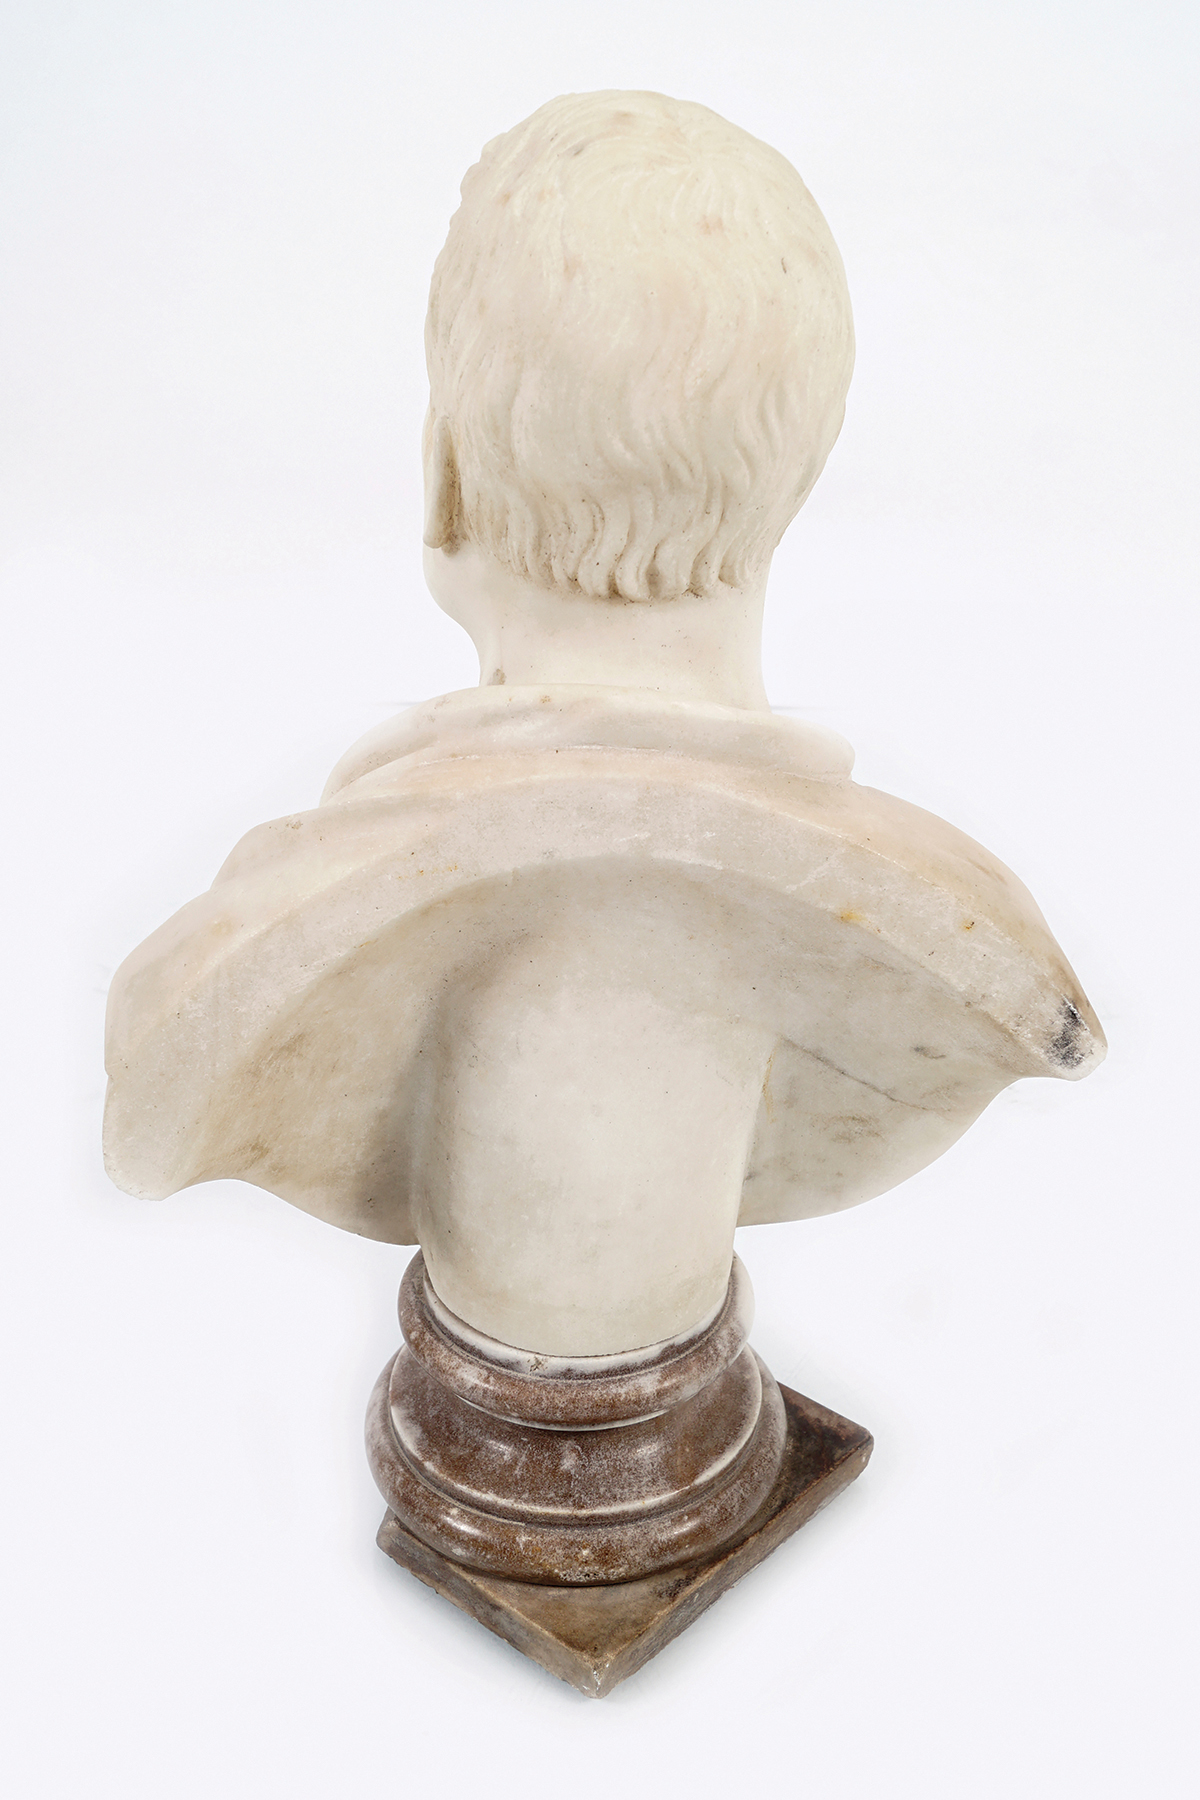 18TH-CENTURY MARBLE BUST - Image 6 of 6